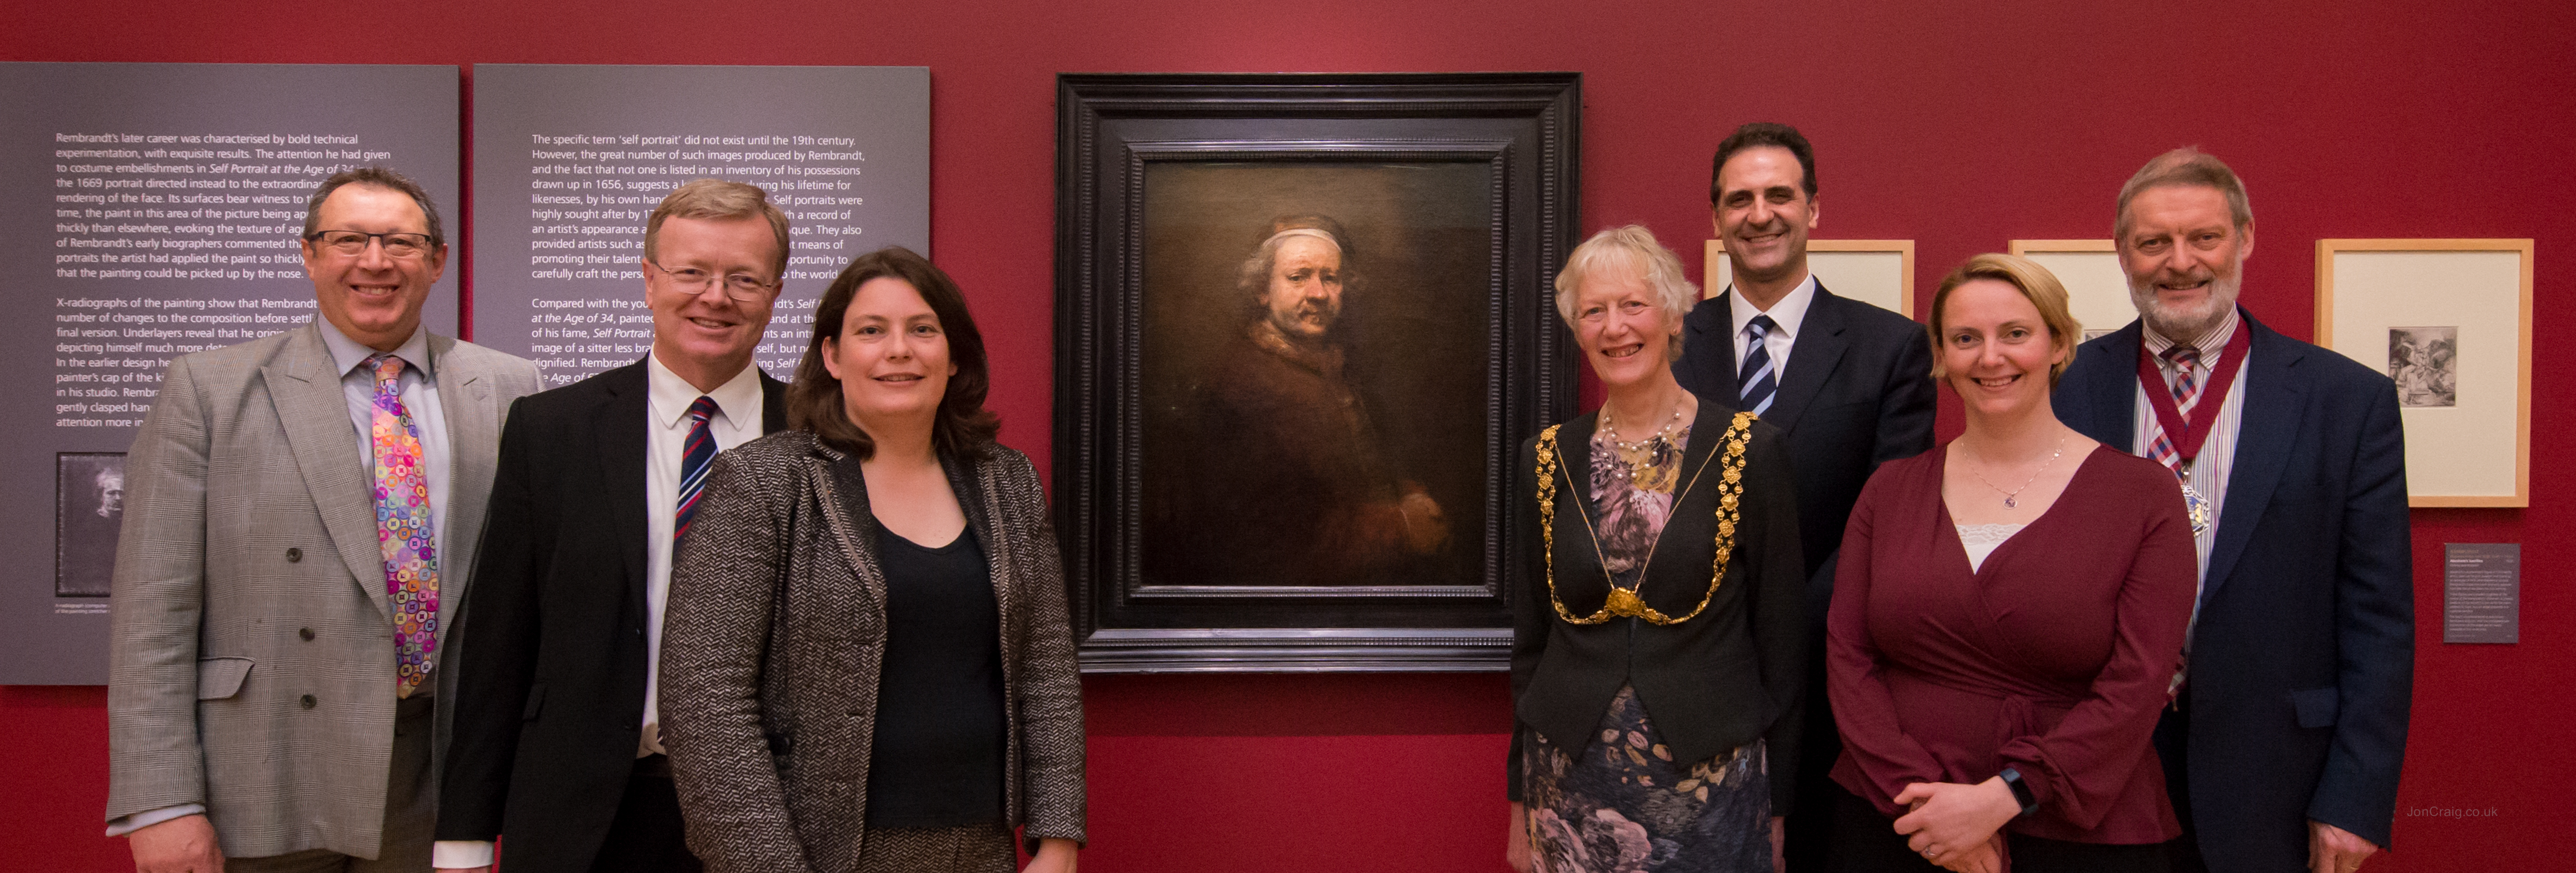 Rembrandt self portrait draws attention at Smith & Williamson-sponsored gallery opening